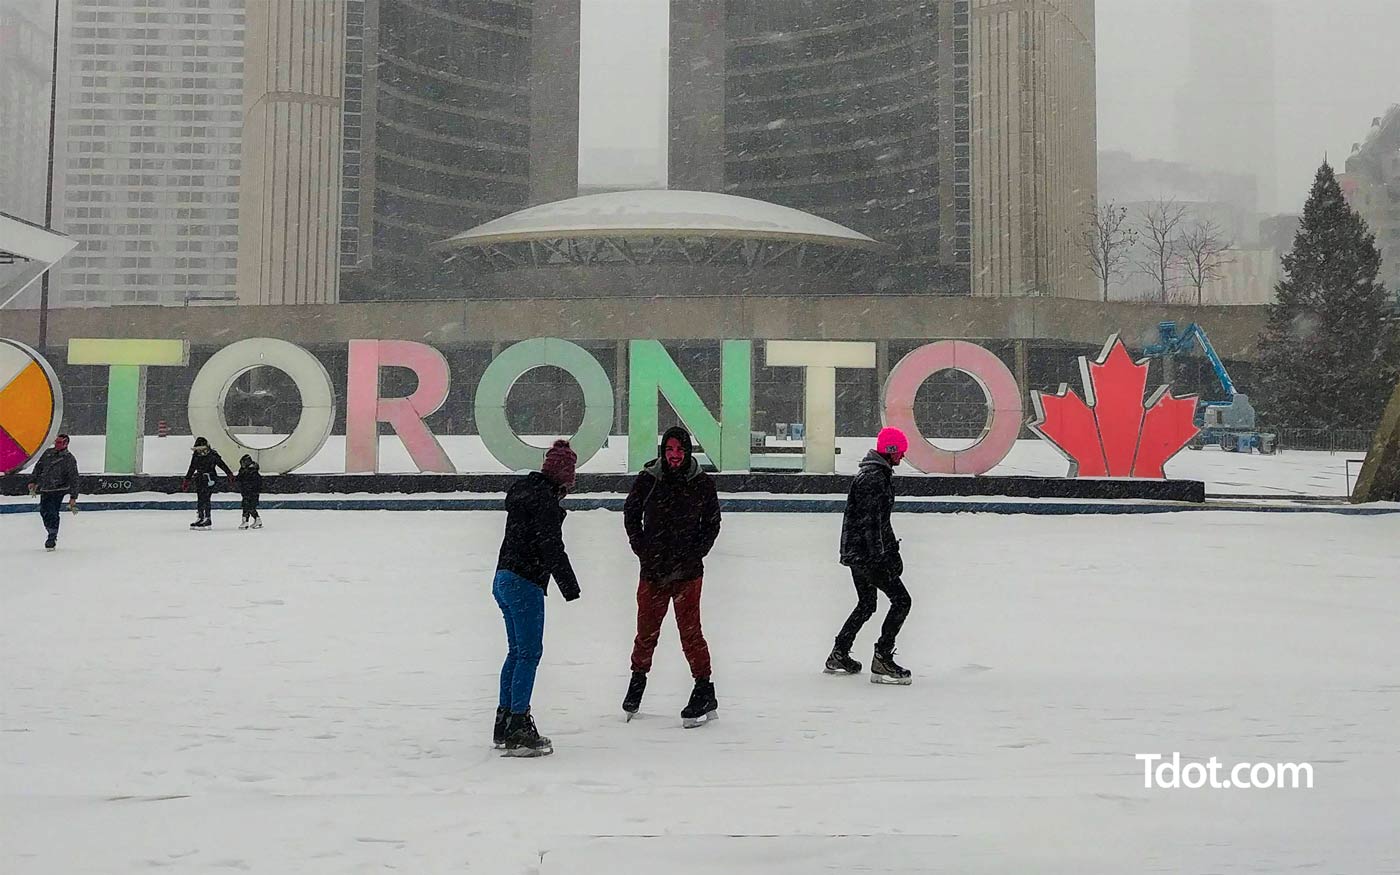 Celebrate Toronto Event and Ice Skating at City Hall and Nathan Phillips Square